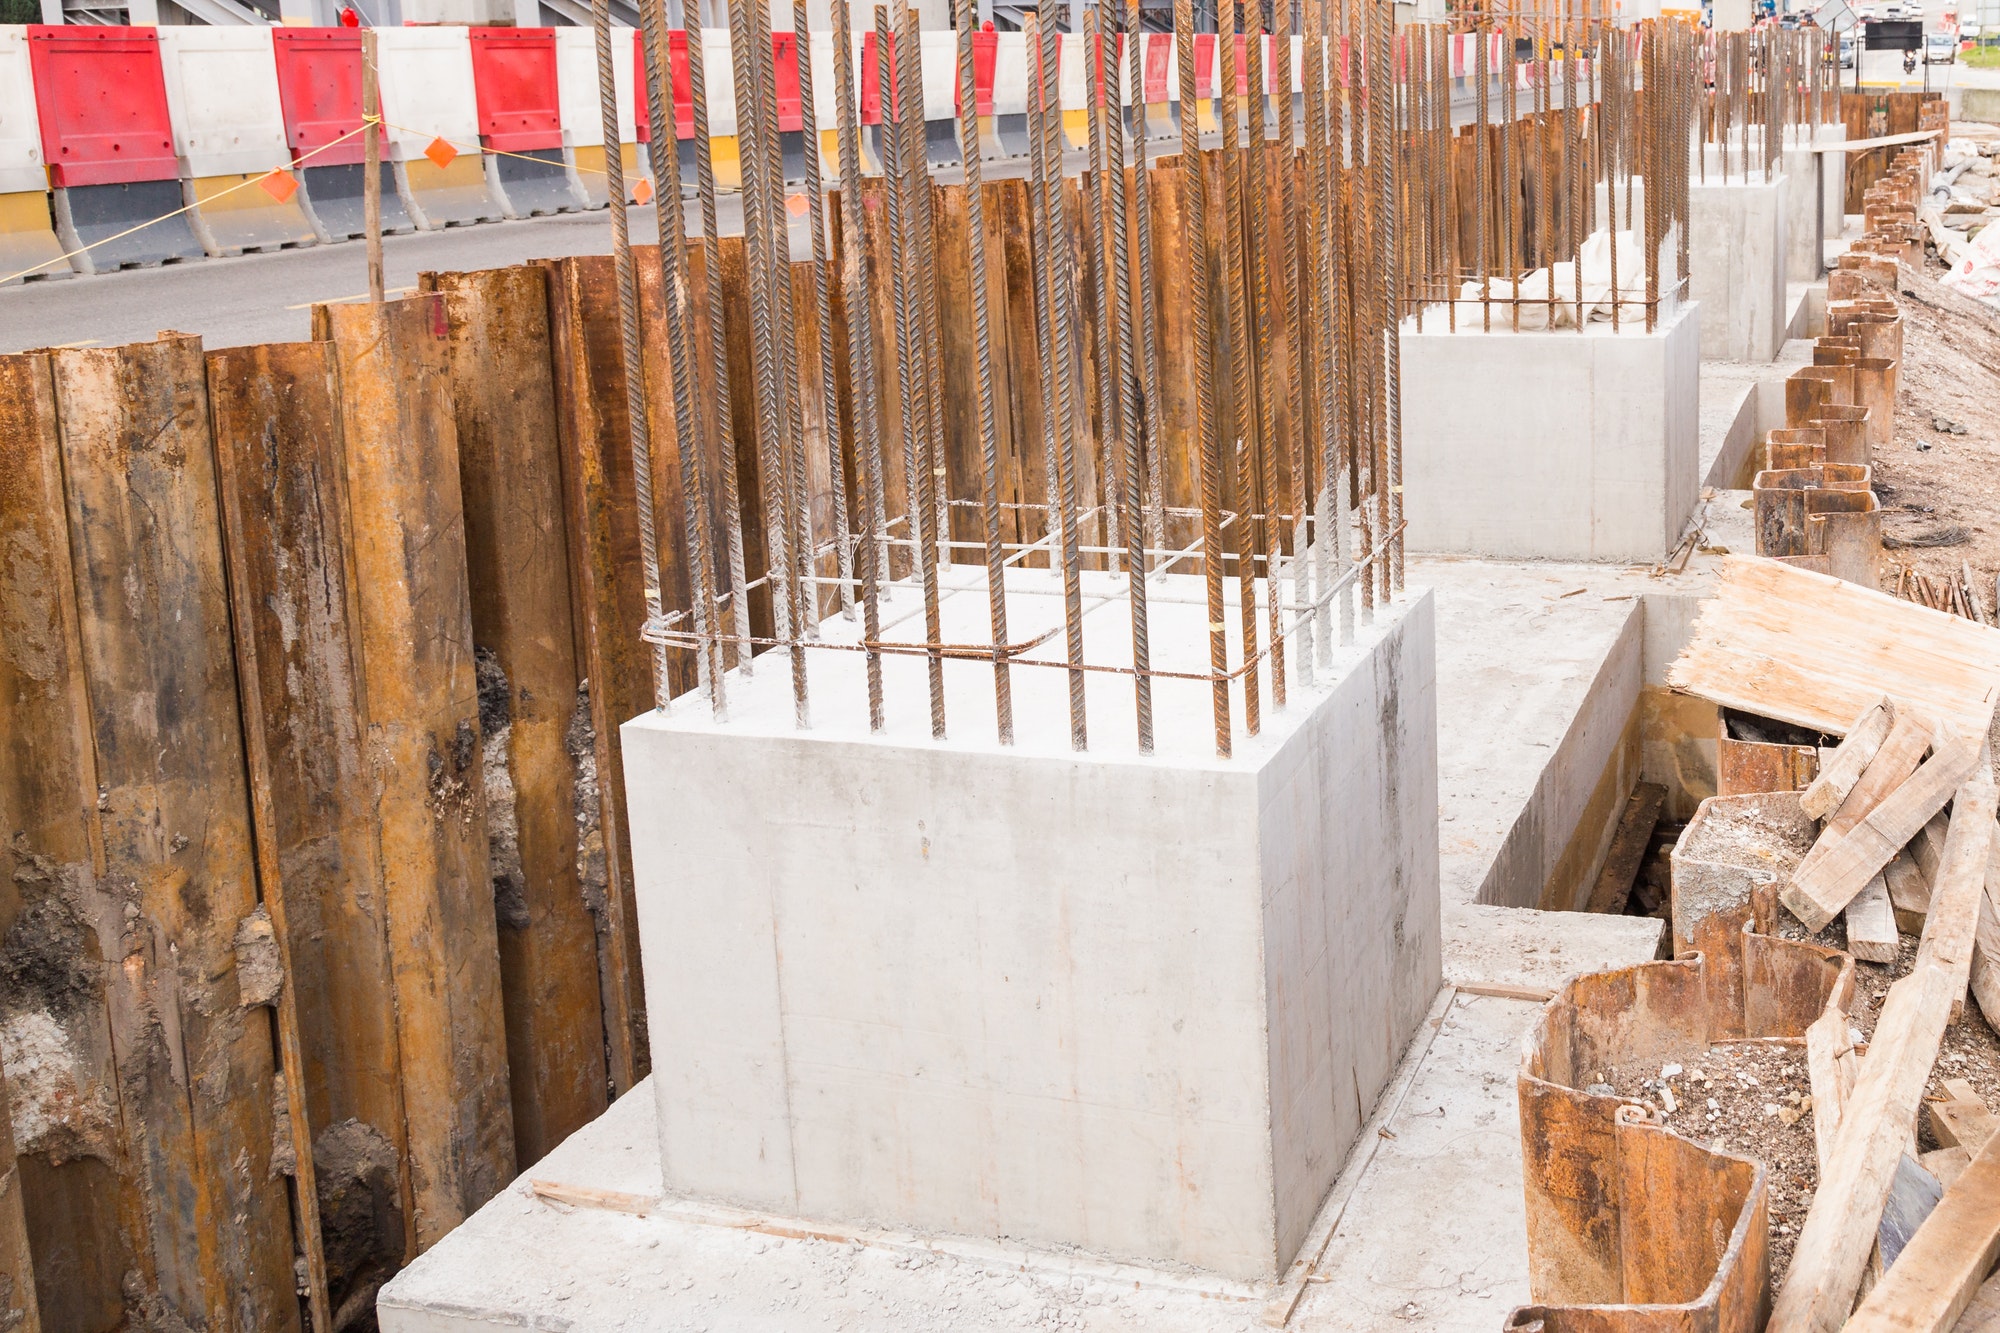 Foundation pillar and beam being constructed at construction site